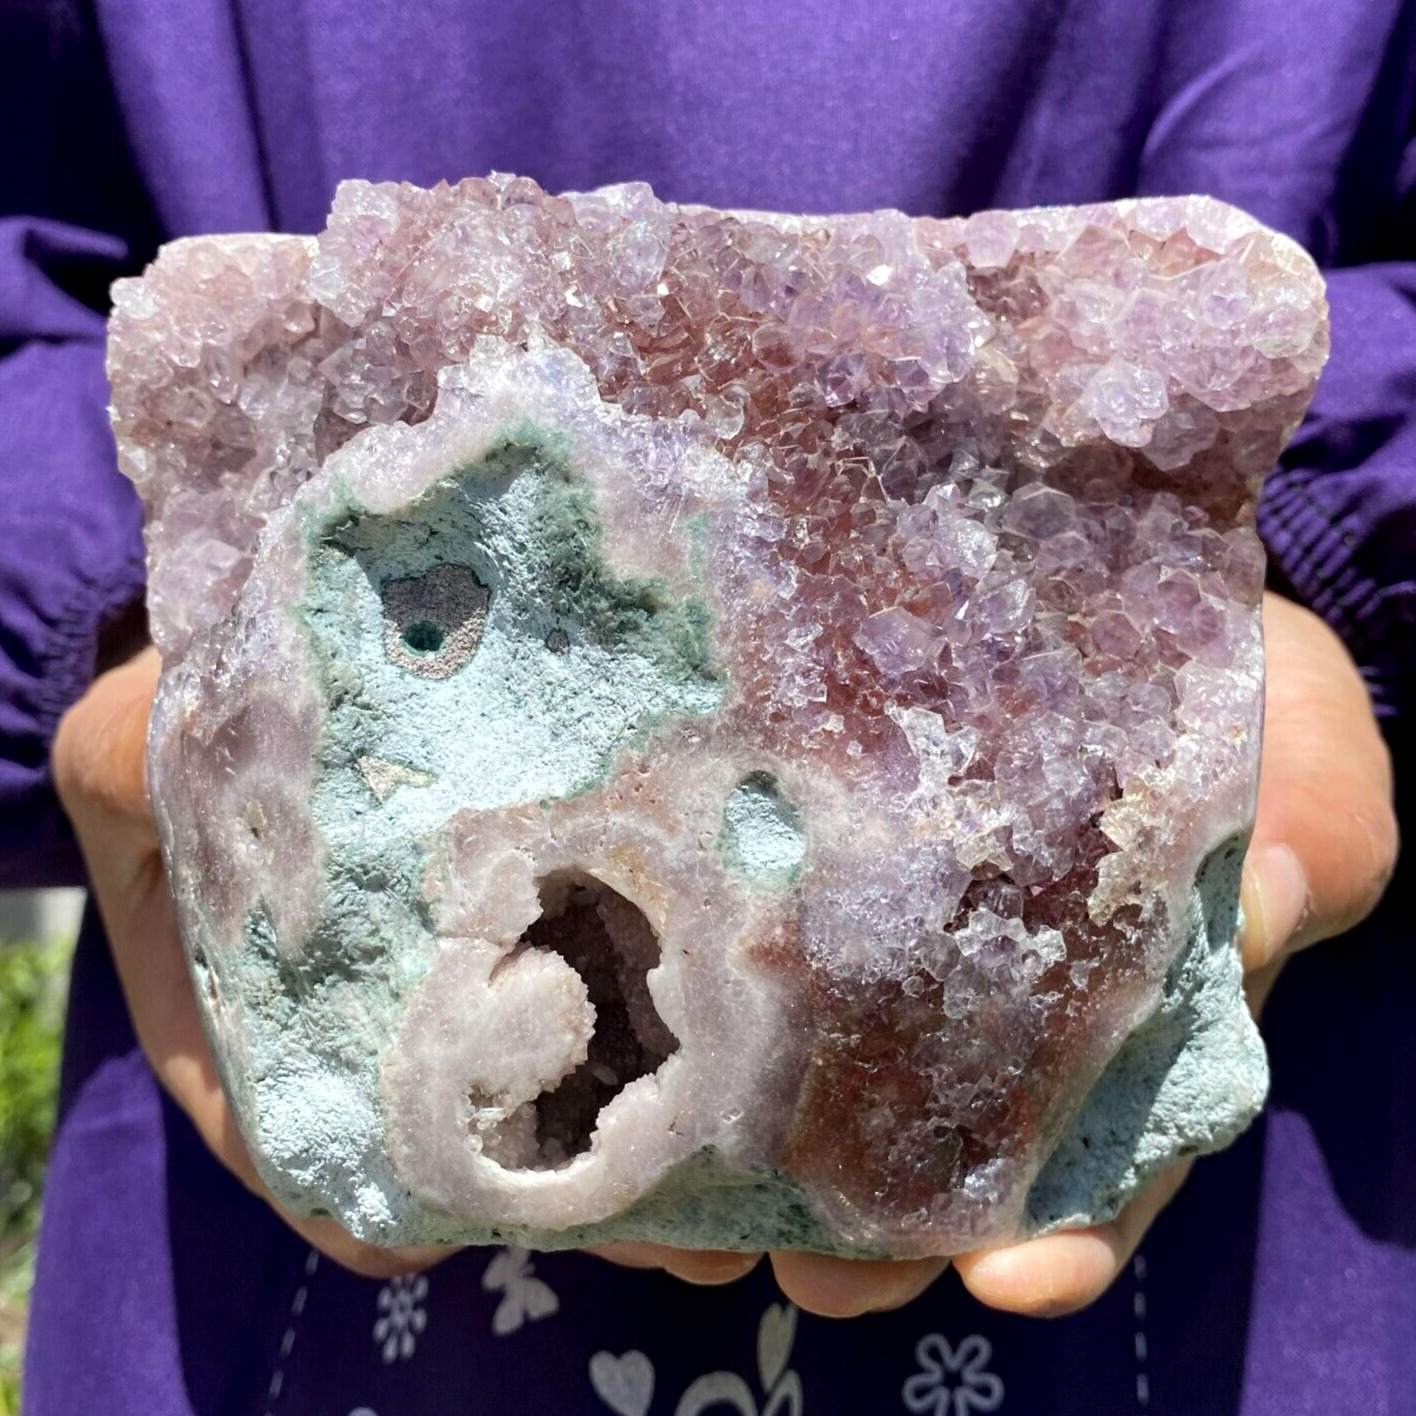 1013g Rare Natural Pink amethyst Druzy Agate Free Form Crystal Mineral Healing